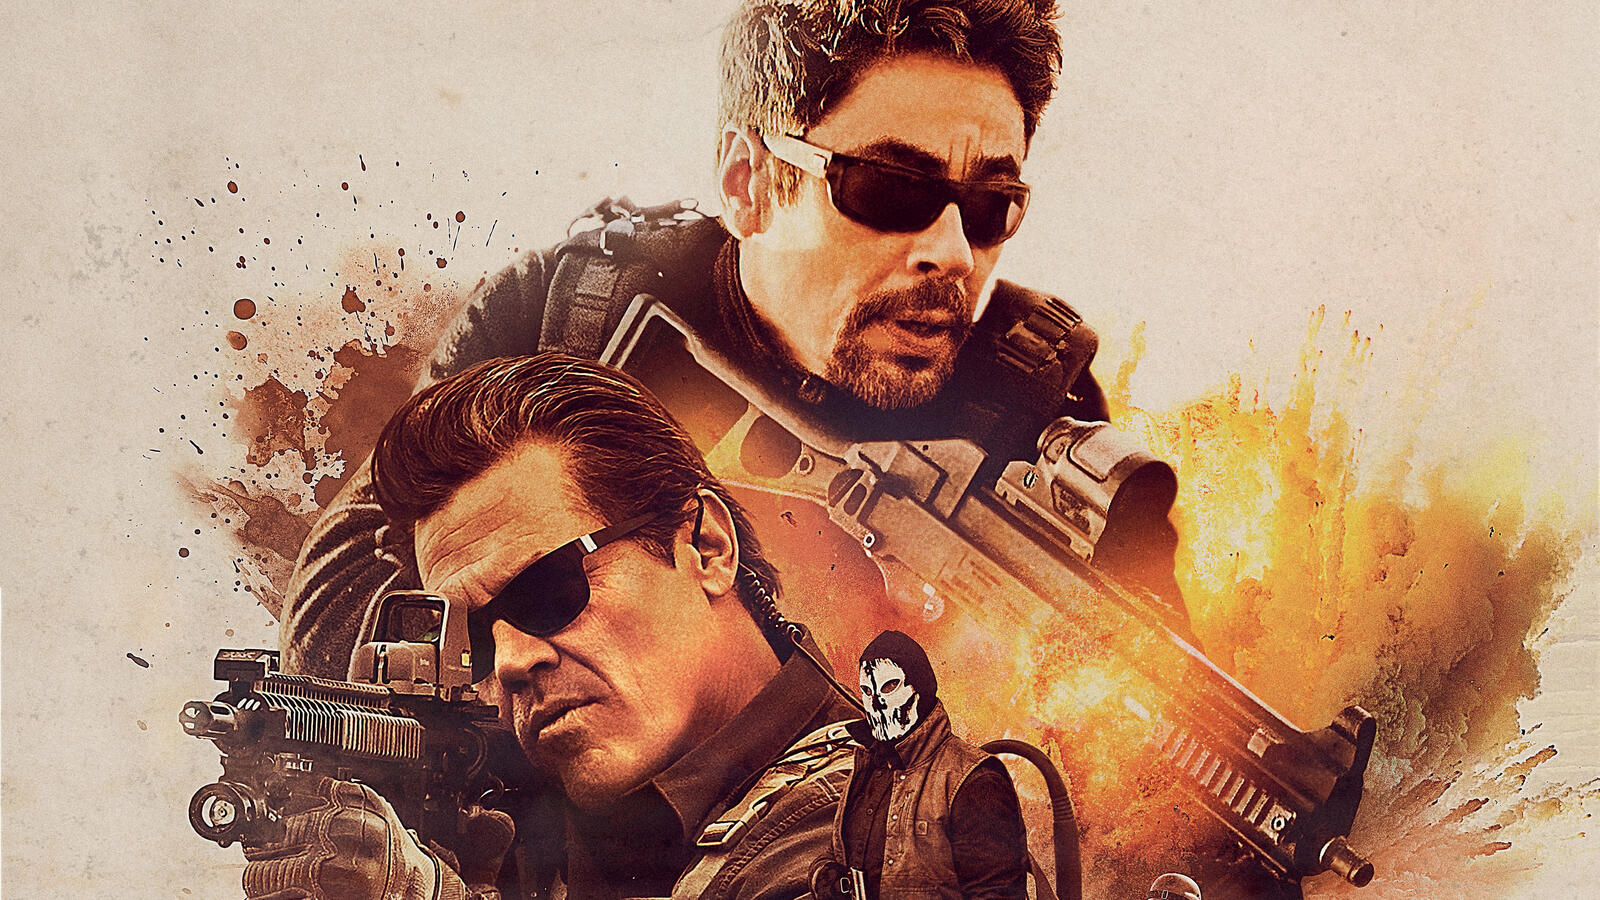 Wallpapers sicario day of the soldado weapons action movie on the desktop